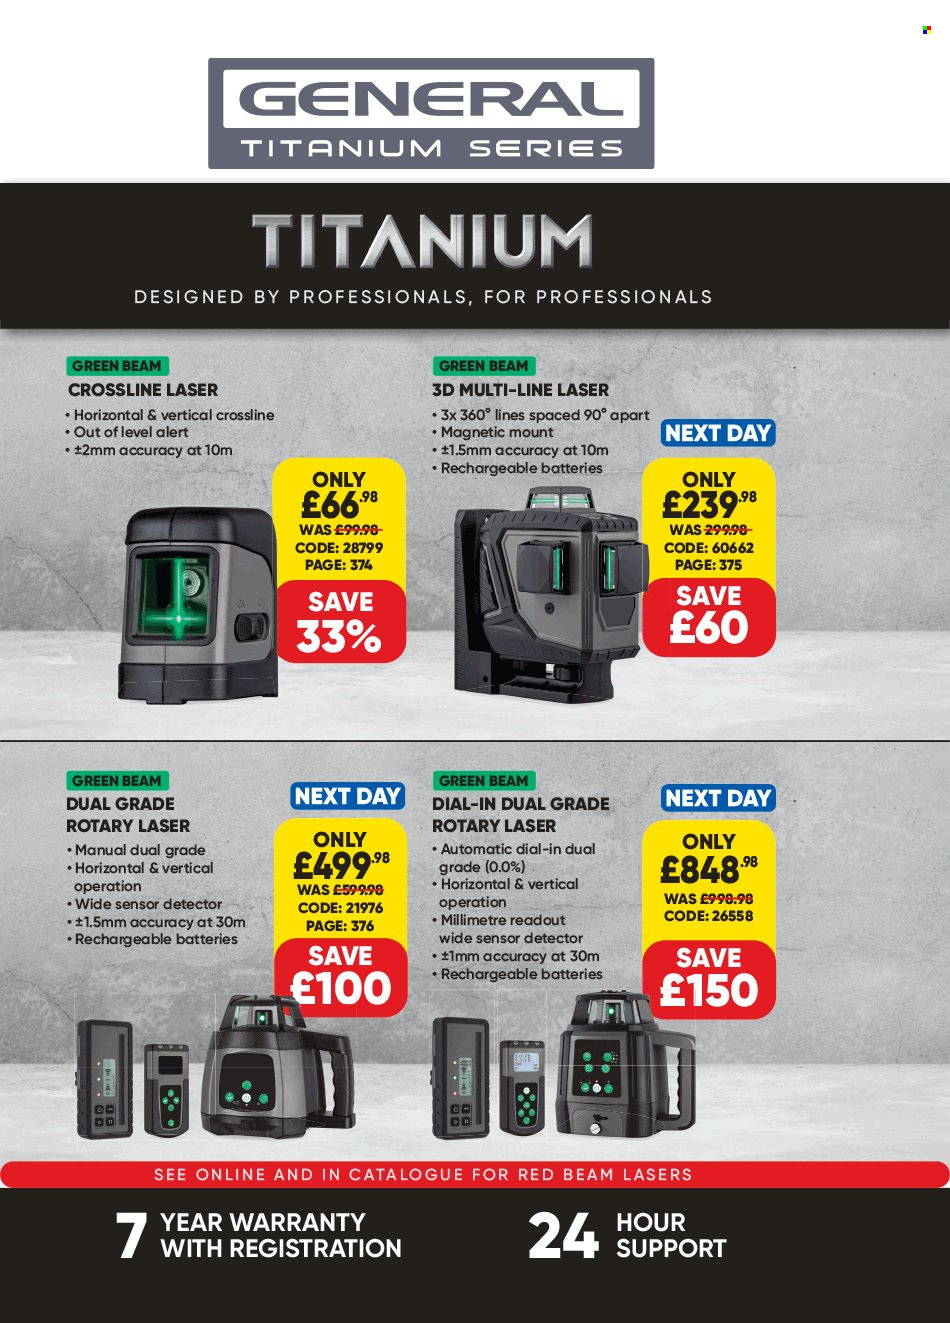 Toolstation offer . Page 372.